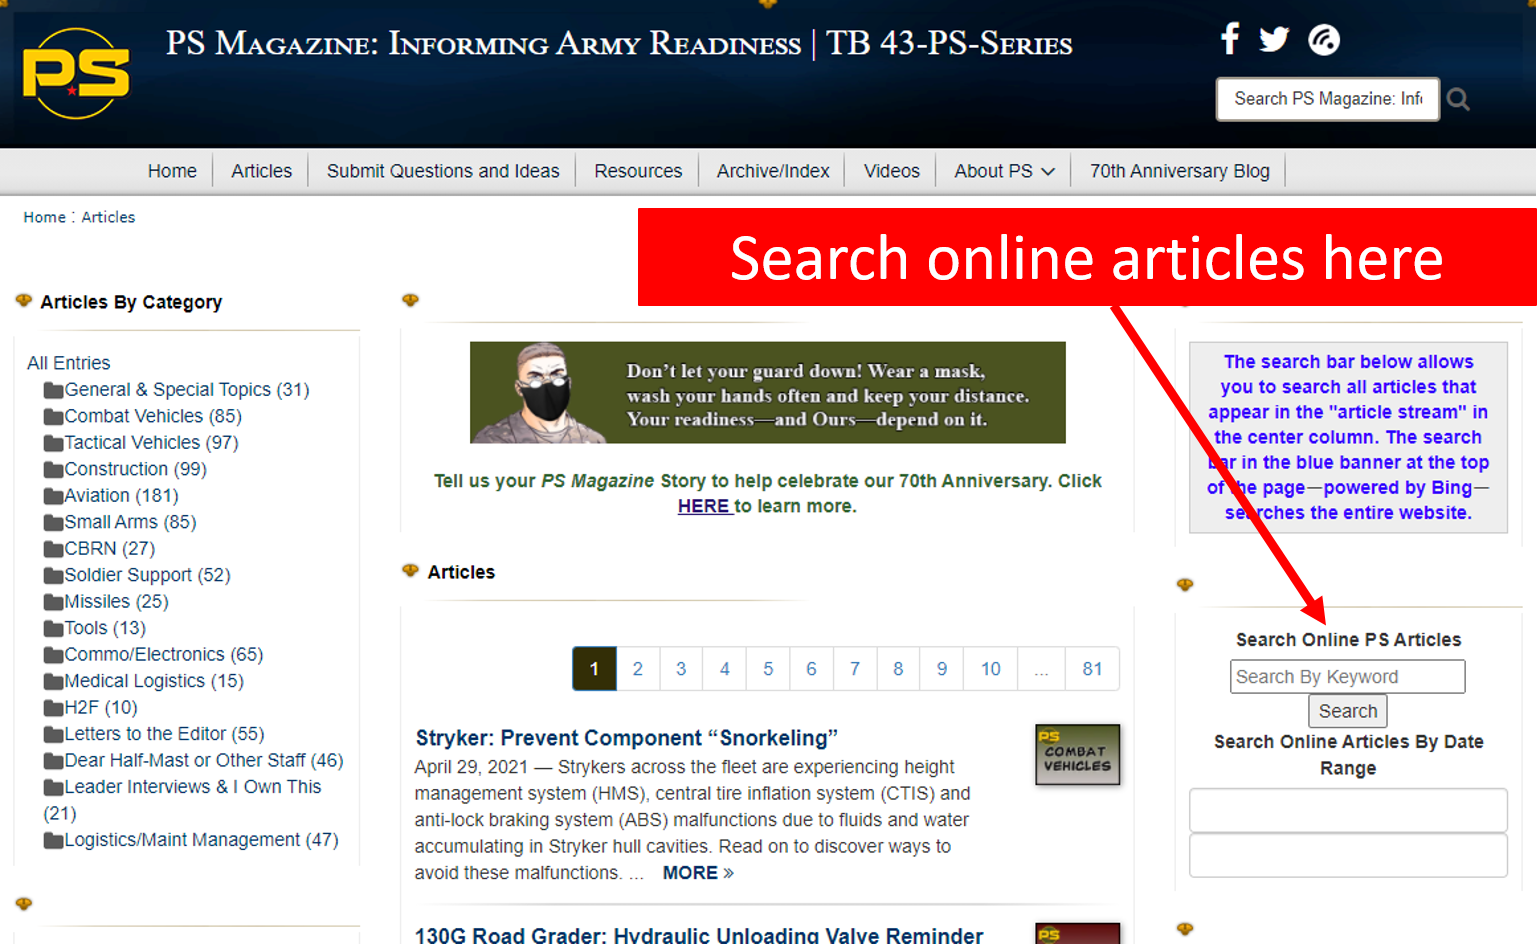 Search online articles here